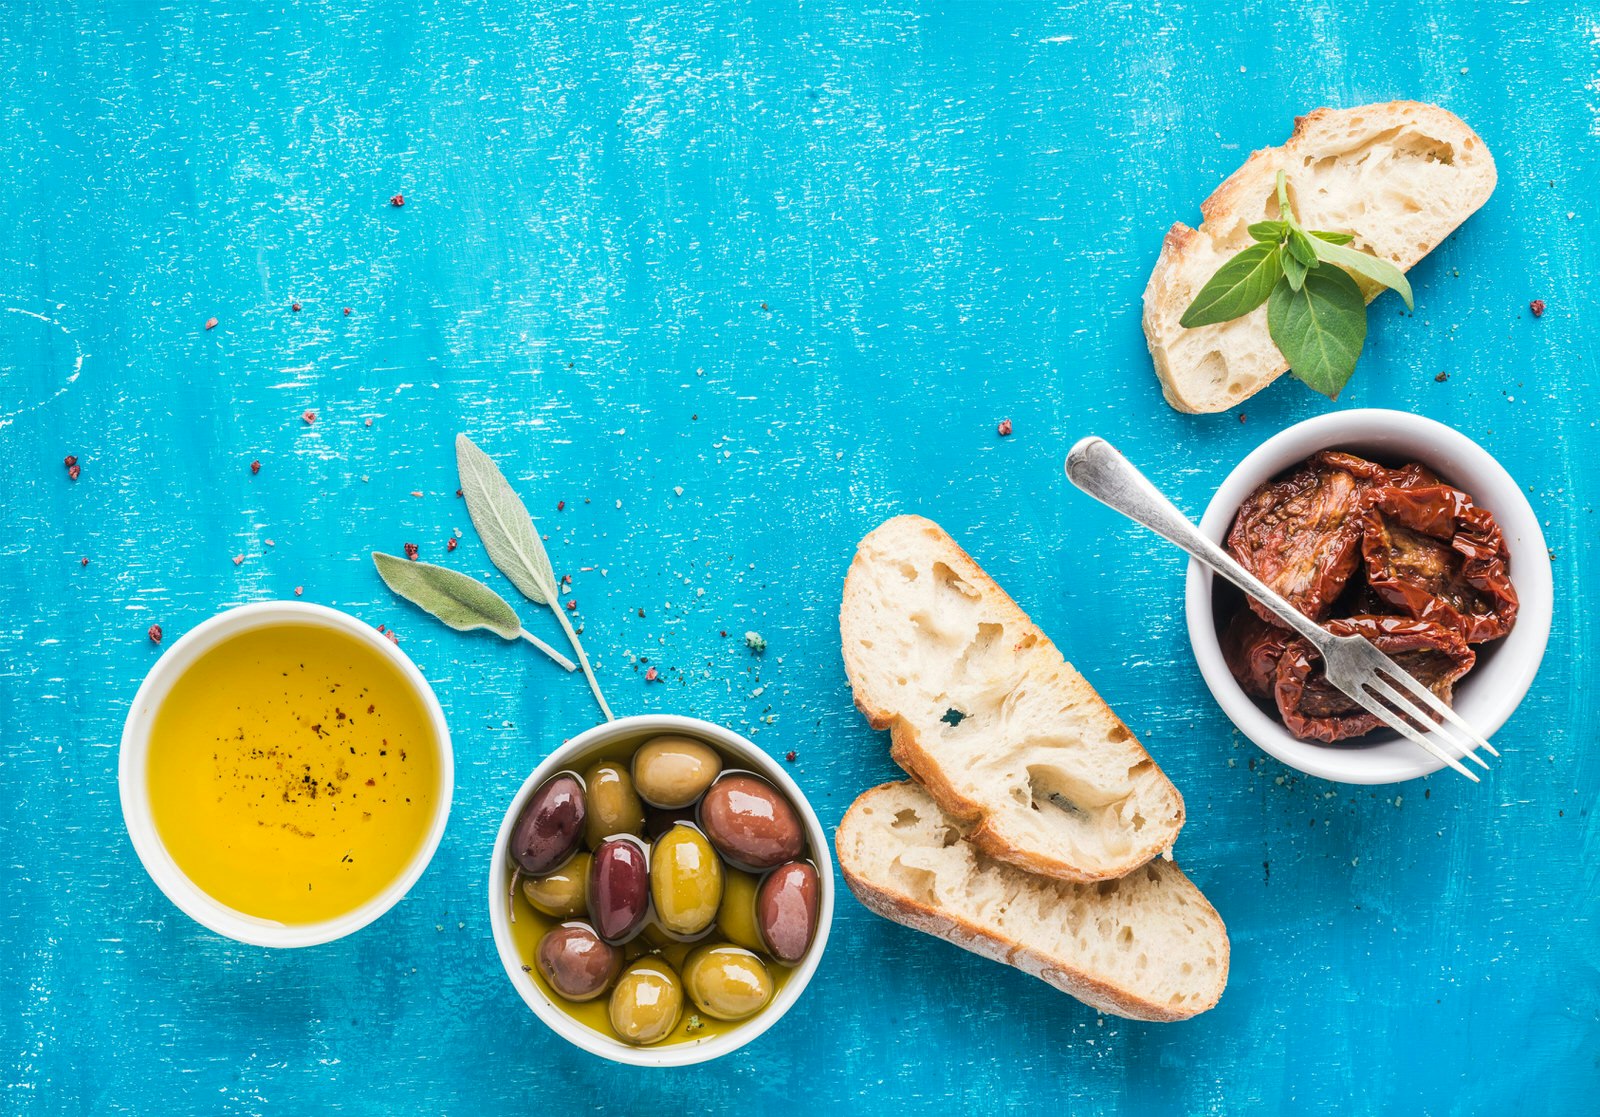 Mediterranean snacks set. Olives, oil, sun-dried tomatoes, herbs and sliced ciabatta bread on over blue painted background, top view